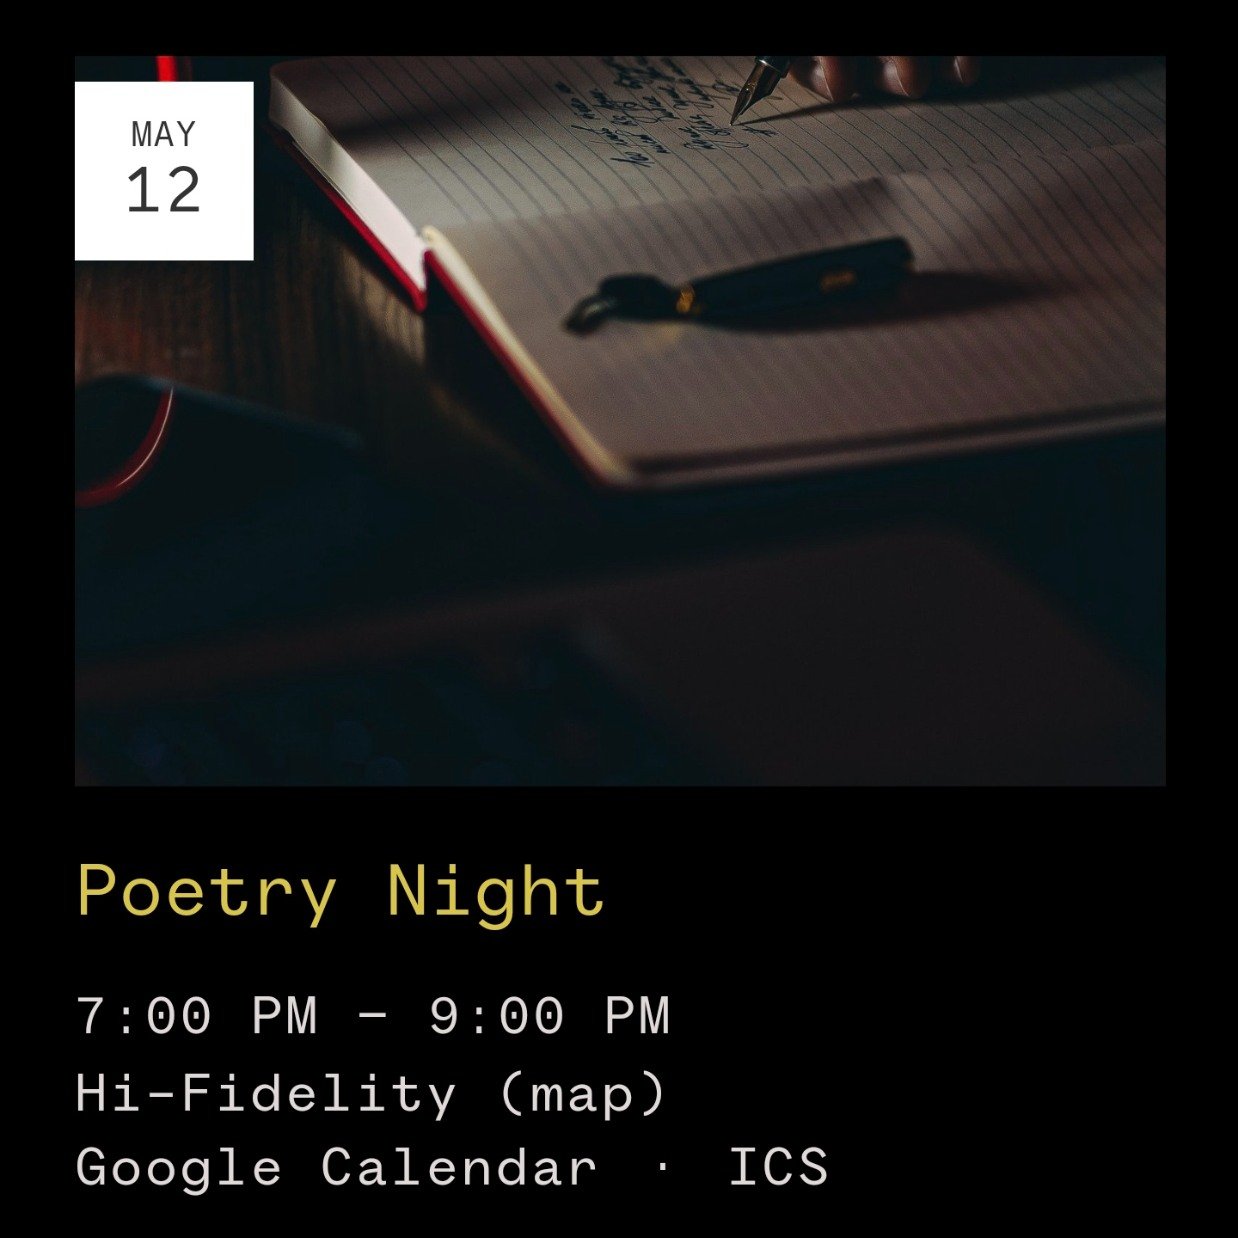 EVERY 2ND &amp; 4TH SUNDAY we host an open mic dedicated to poetry, prose, and any other written format you'd like to share!

The sign-up sheet hits the bar at 6:30pm and the mic is open from 7 - 10pm.

It's been amazing having so many talented write